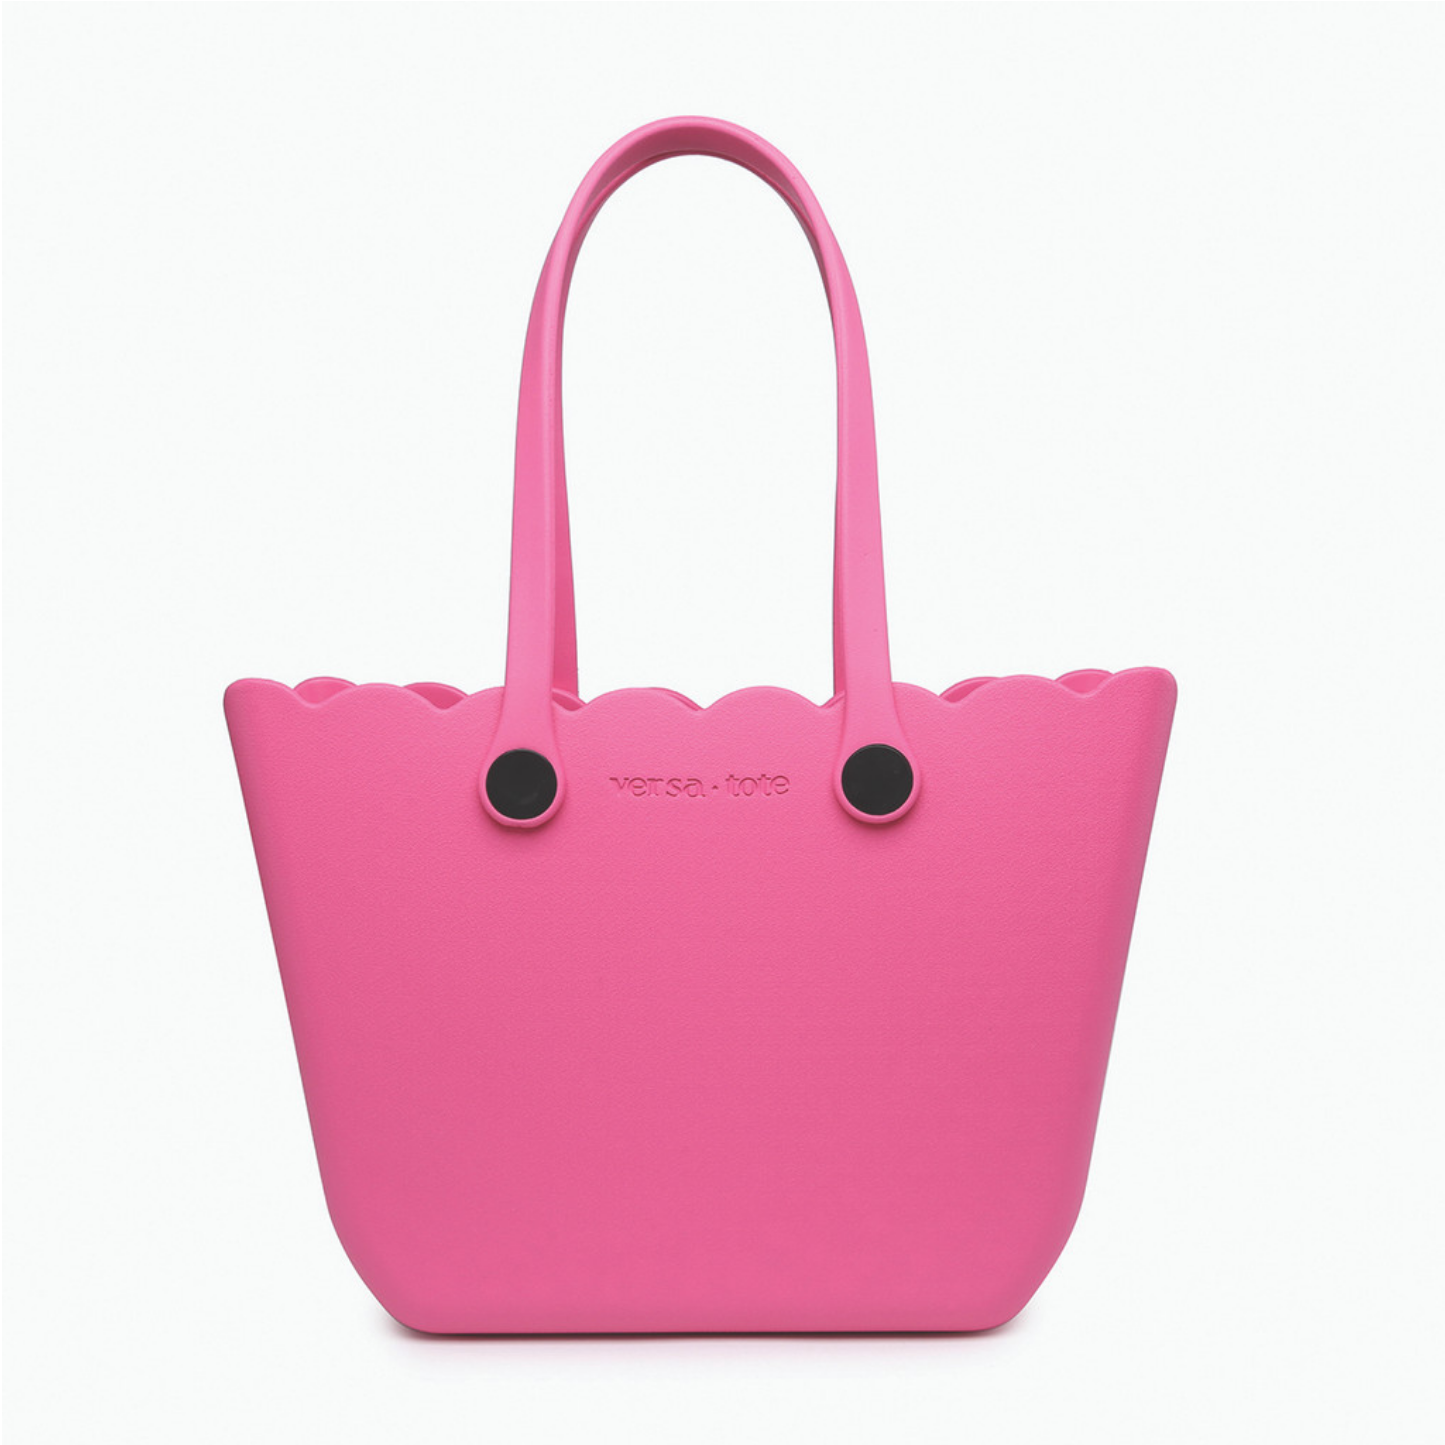 Hot Pink Scalloped Versa Tote w/ Interchangeable Straps